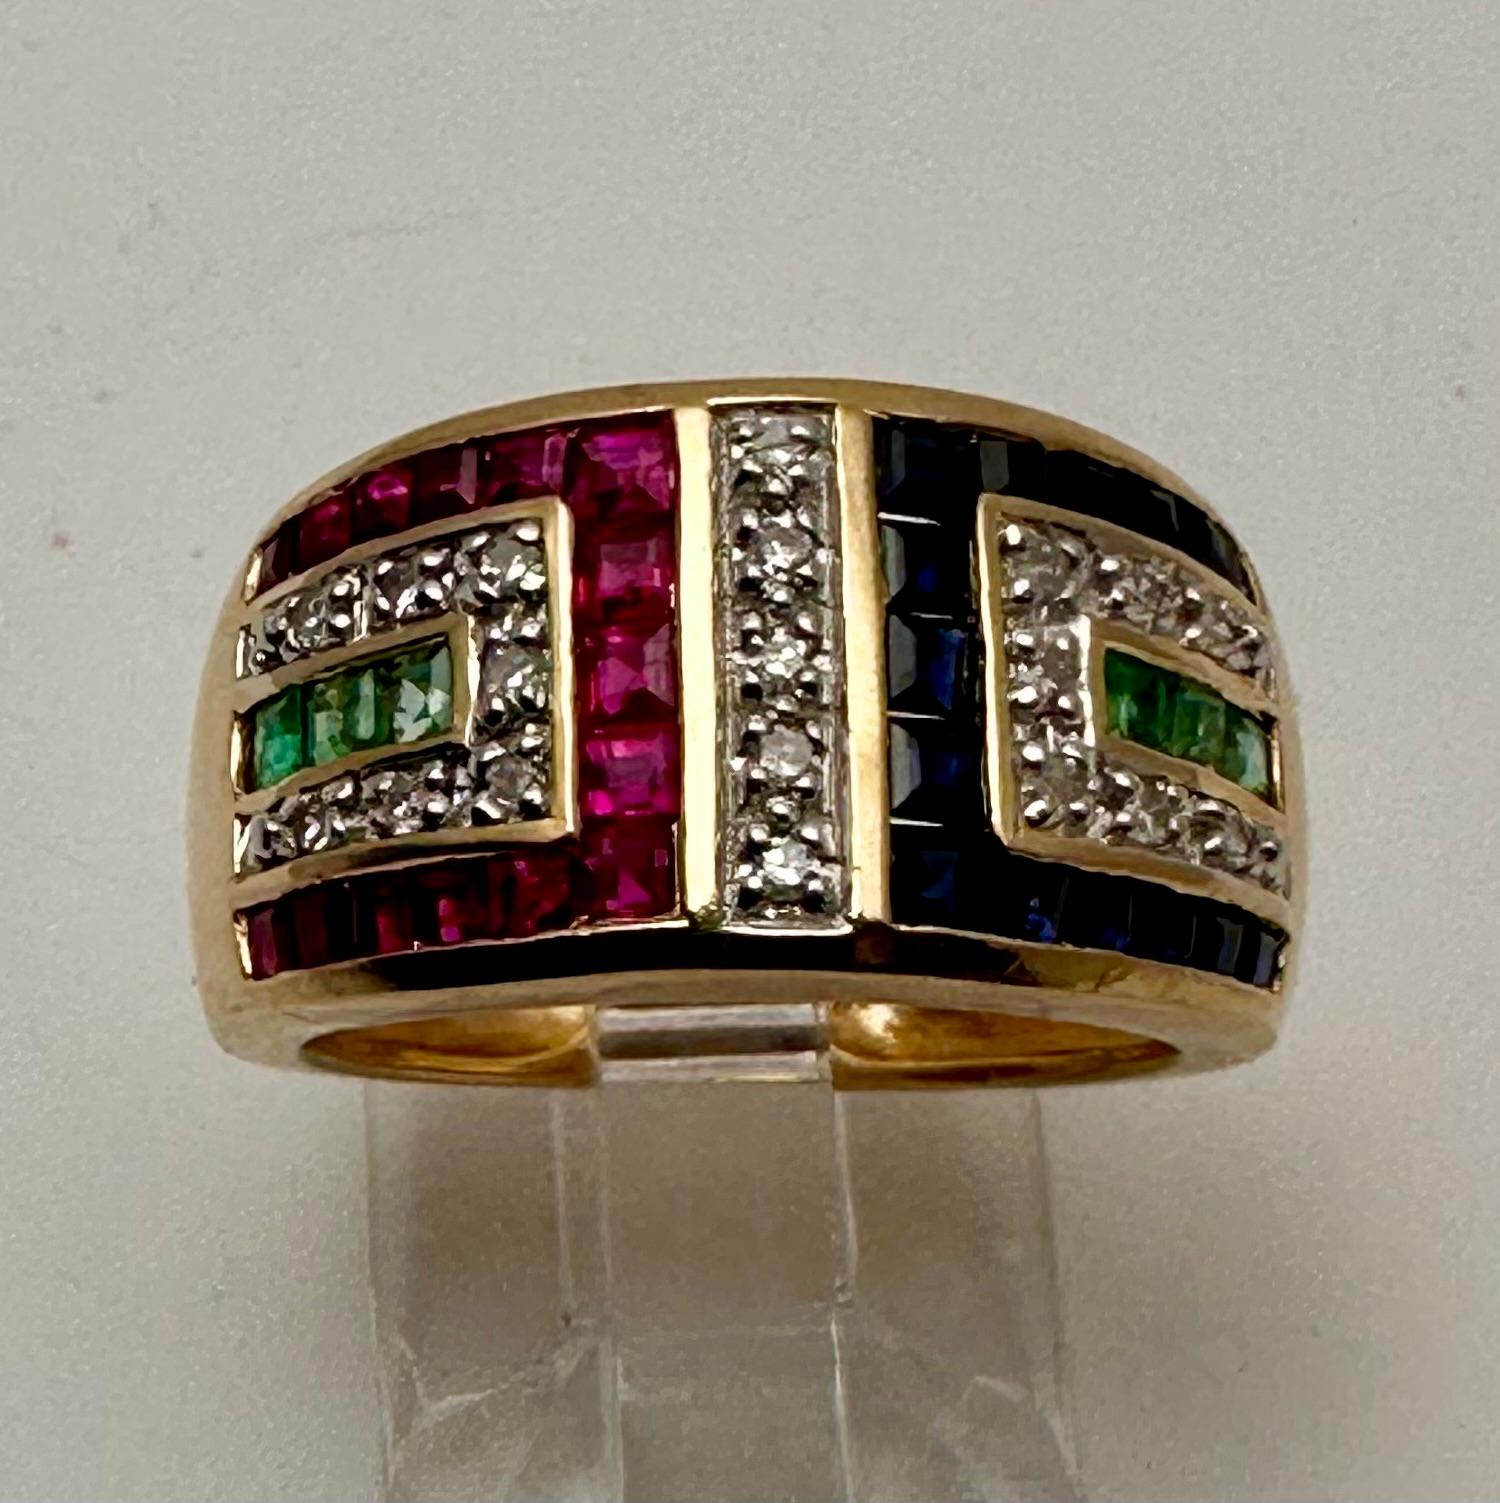 14k Yellow Gold 10.5 mm Wide Ruby Sapphire Diamond and Emerald Ring Size 10. Colored stones are princess cut with 19 round diamonds.
RUBY
This vibrant, gem-like baby name is often associated with wealth, health, passion, and success in love,